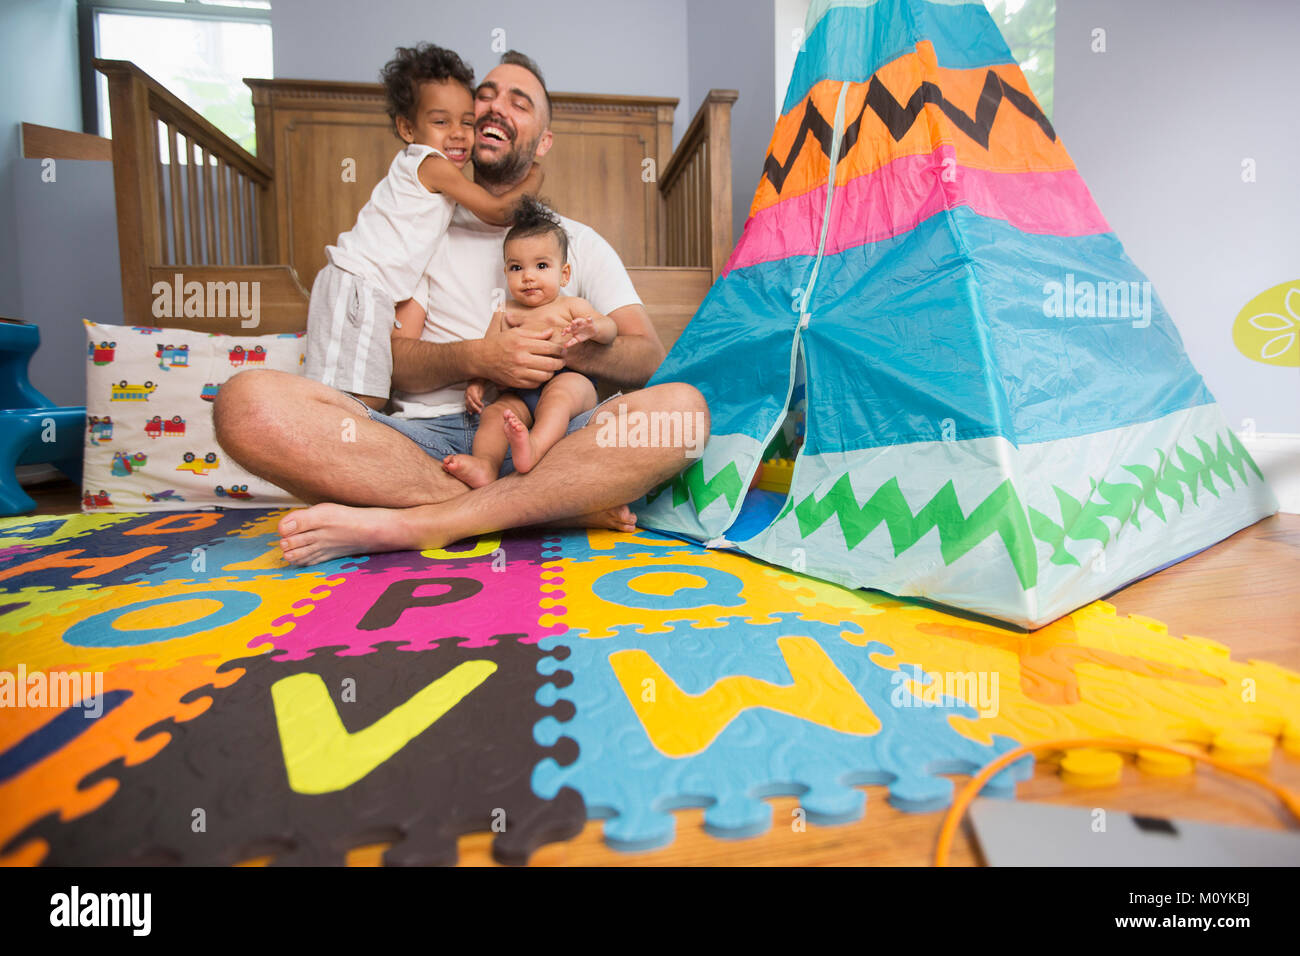 Father sitting on playroom floor holding son and daughter Stock Photo